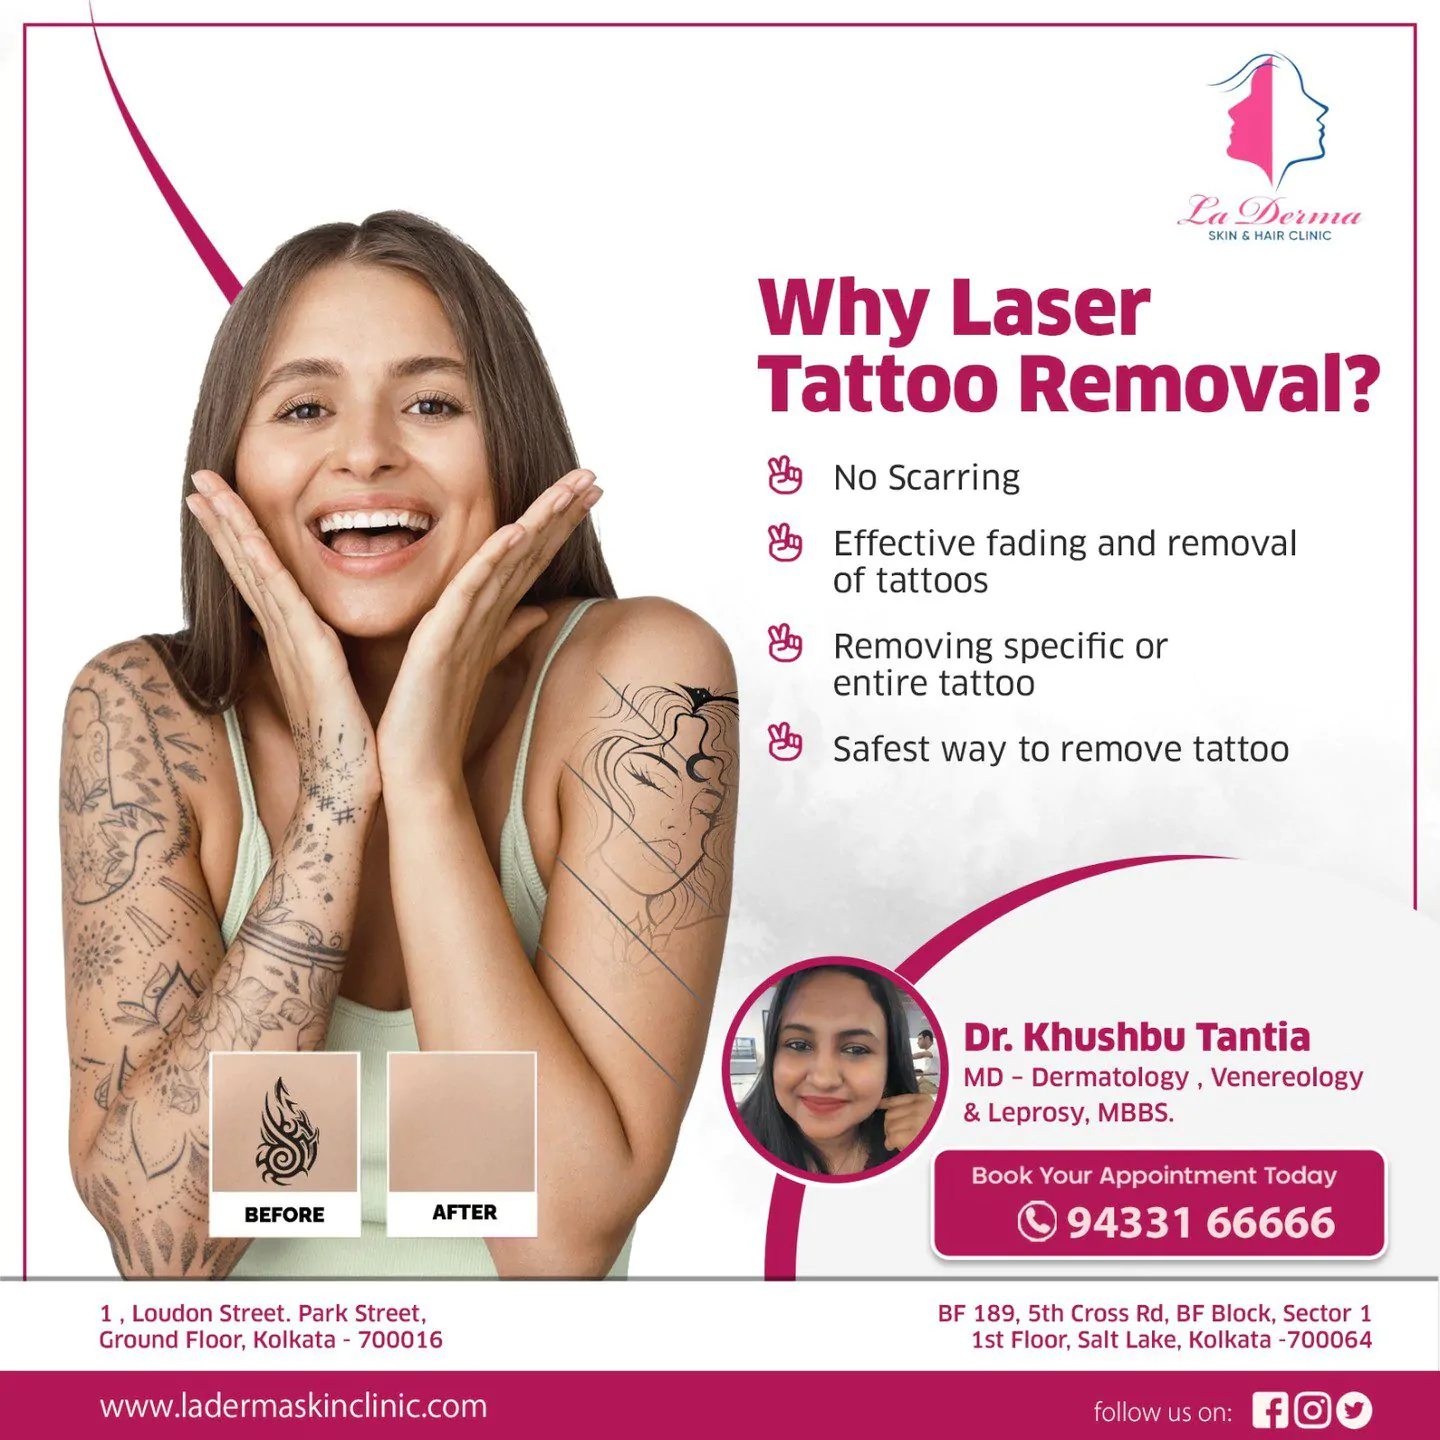 Why Laser Tattoo Removal at La Derma?